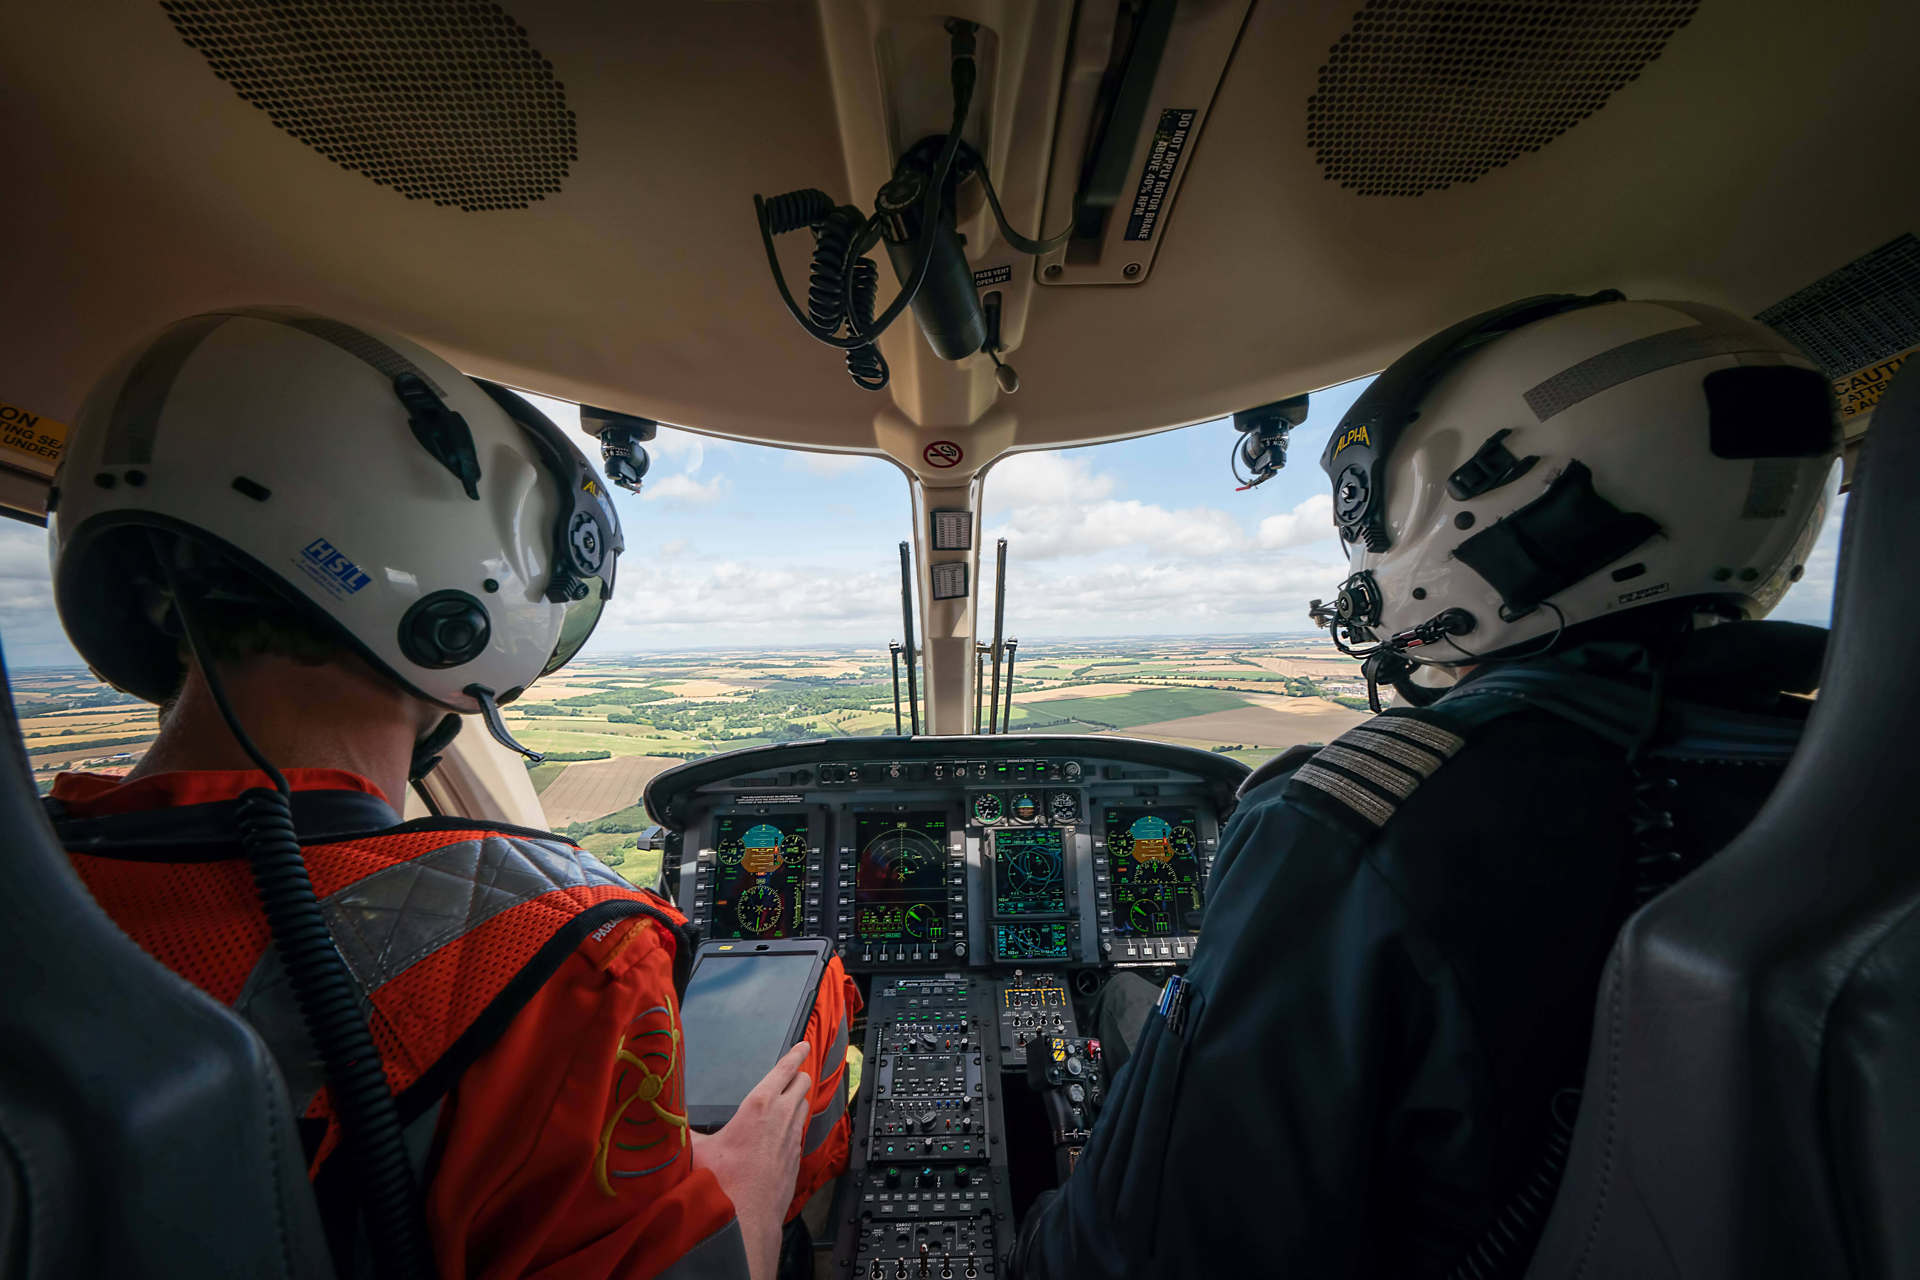 A paramedic and pilot sat in the cockpit of the helicopter whilst in flight.